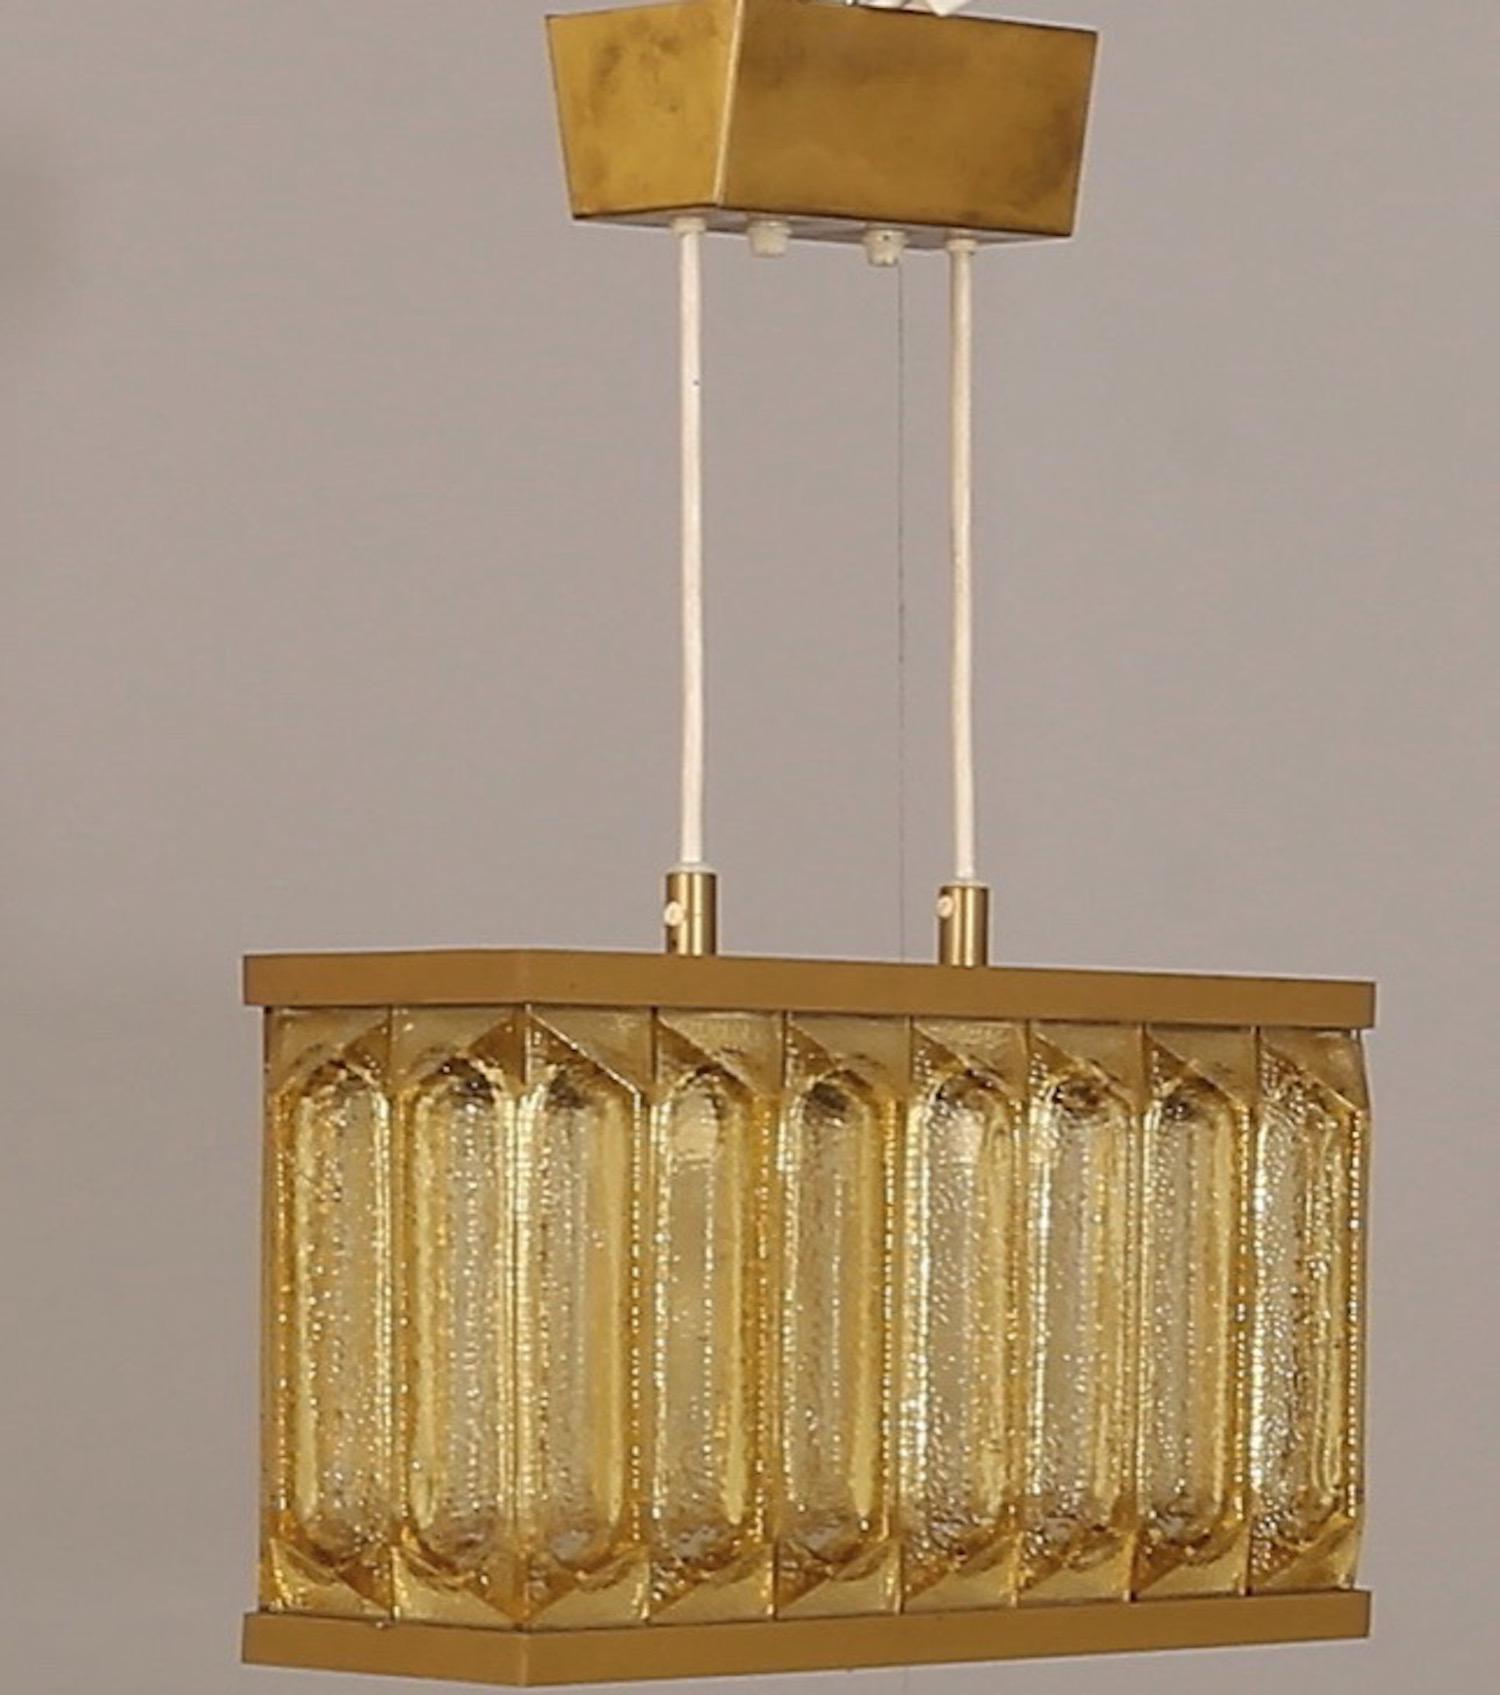 Scandinavian Modern Glass and Brass Ceiling Lamp Attributed to Orrefors For Sale